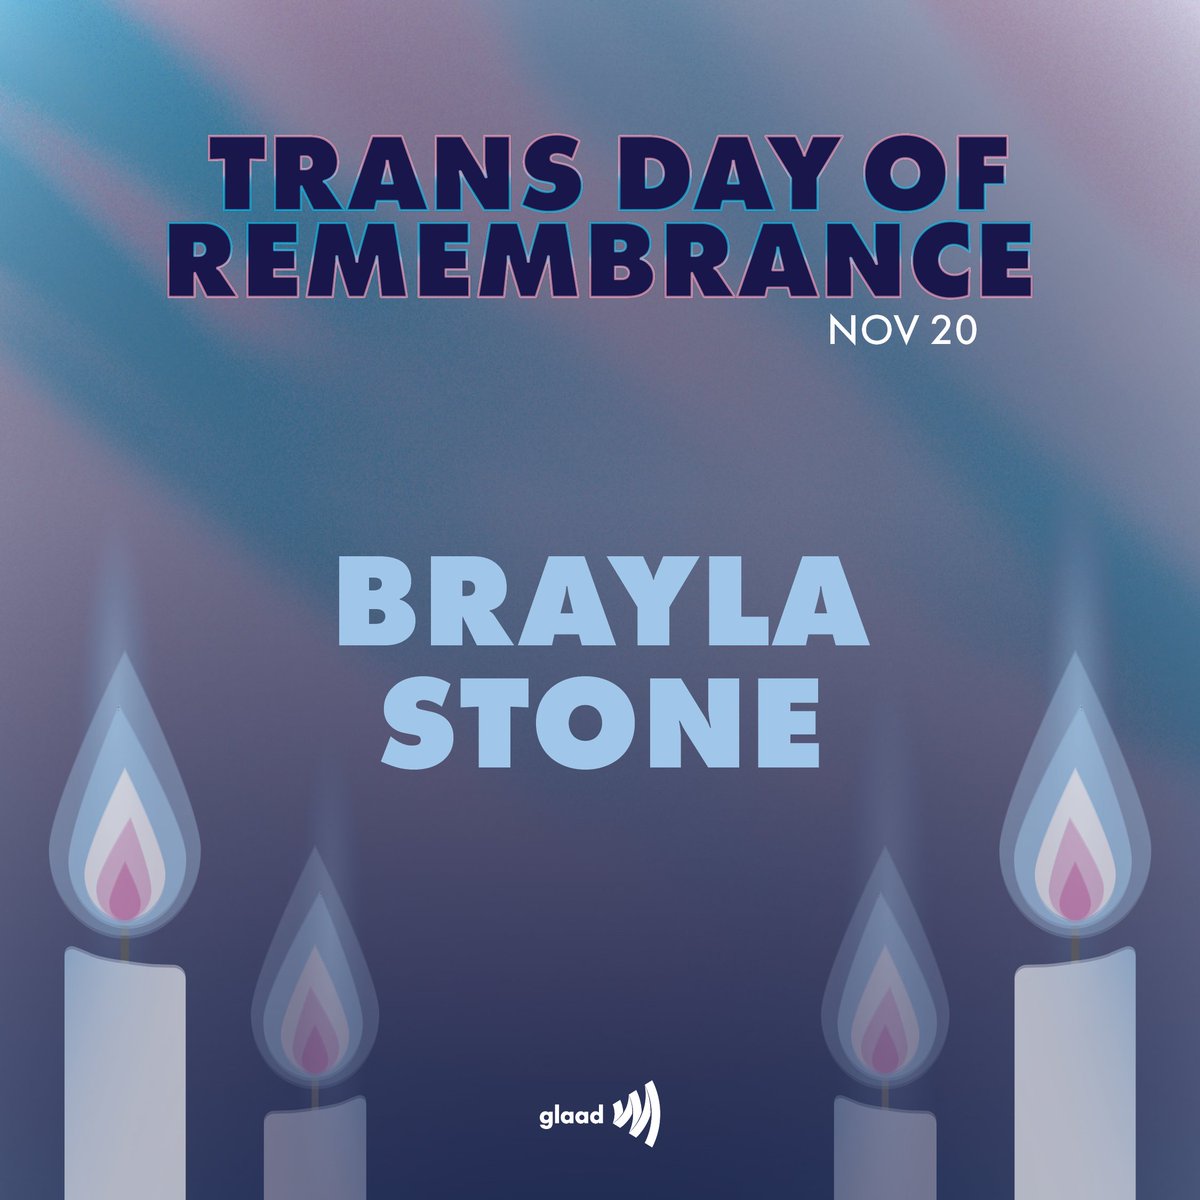 Brayla Stone, a transgender teenager, was killed in Dallas, Texas on June 25, 2020. She was 17 years old.